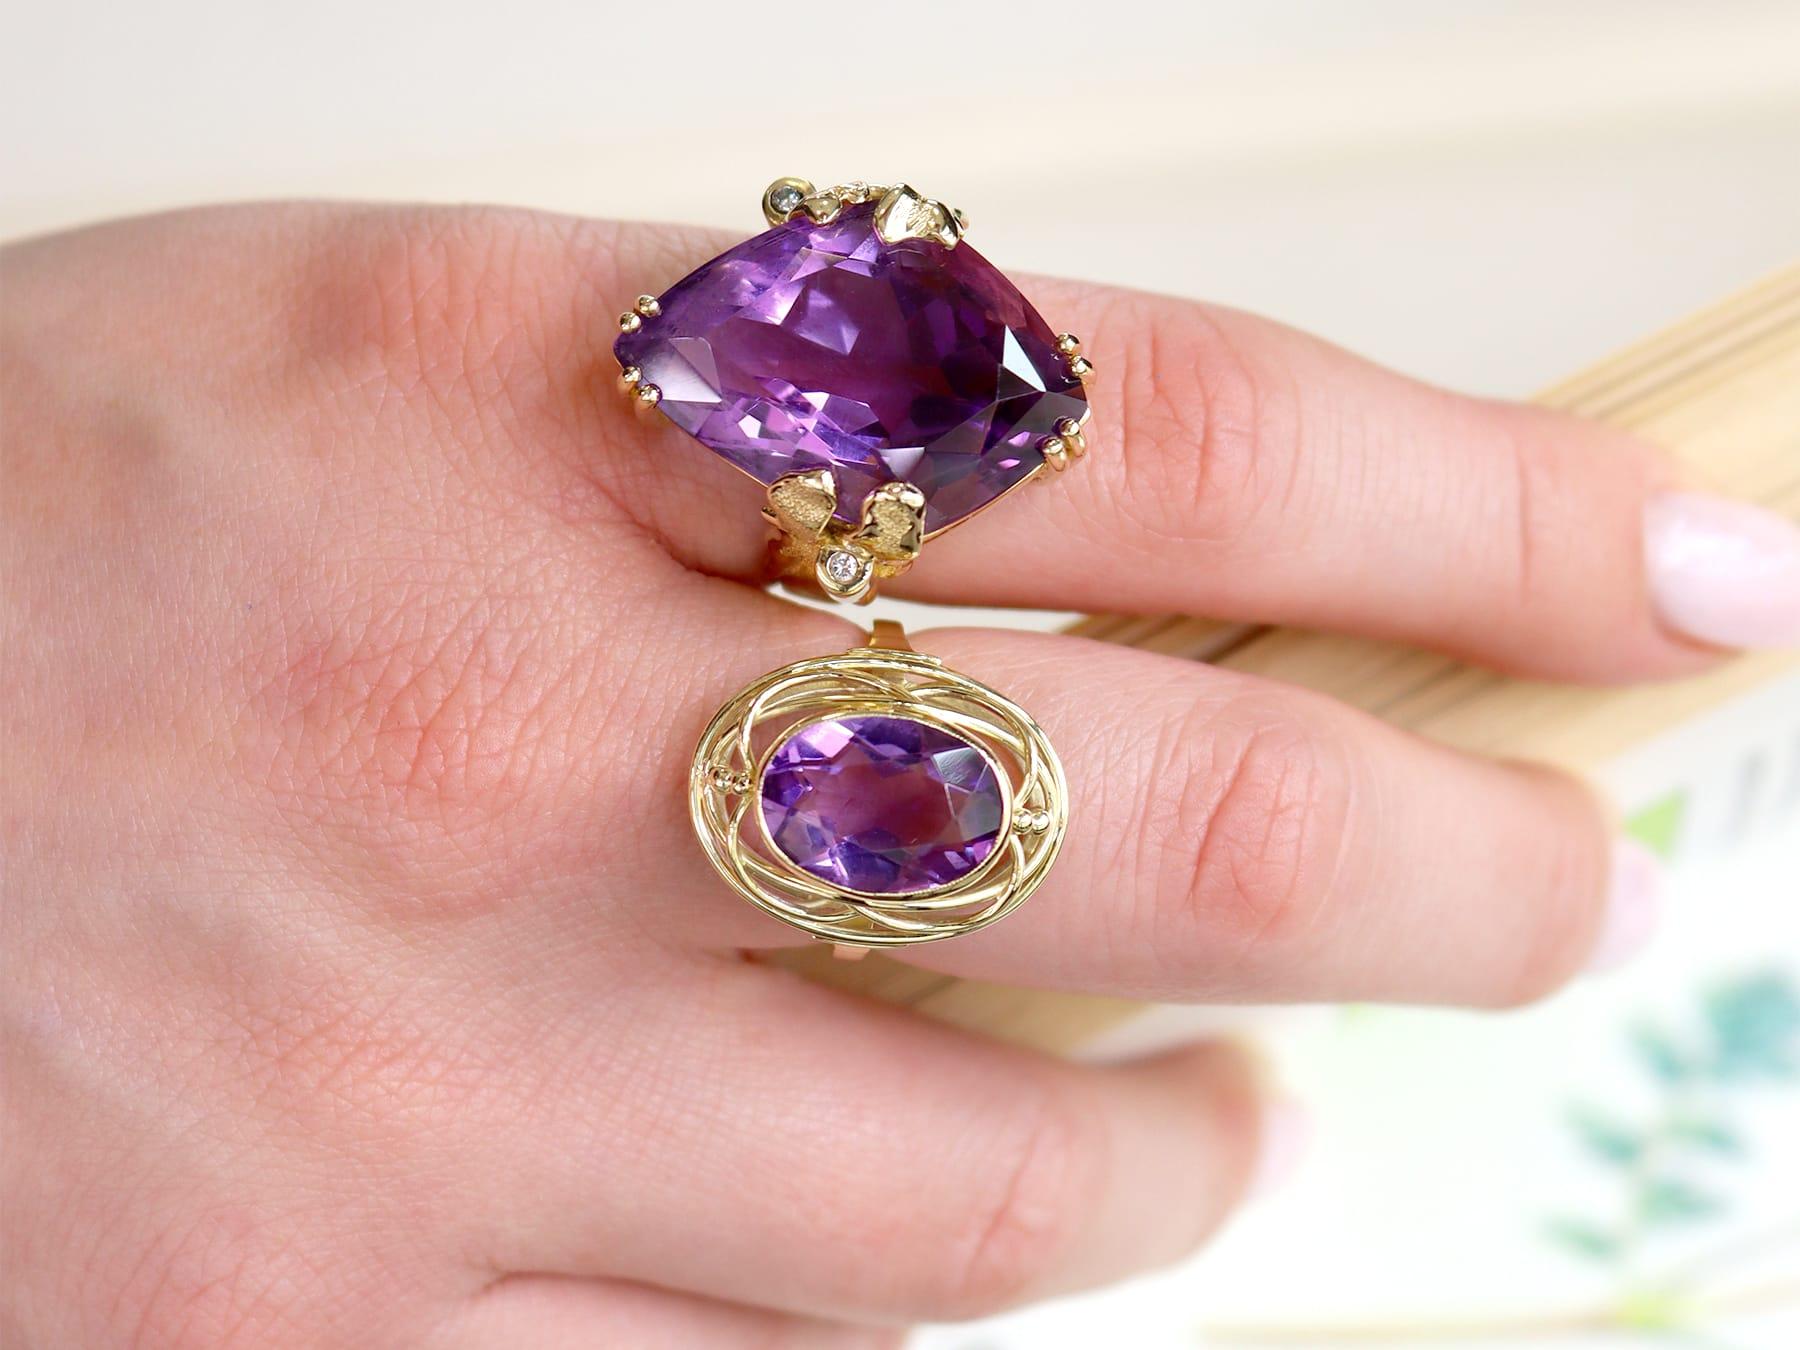 Vintage 28.83ct Amethyst and 0.06ct Diamond, 14k Yellow Gold Dress Ring In Excellent Condition For Sale In Jesmond, Newcastle Upon Tyne